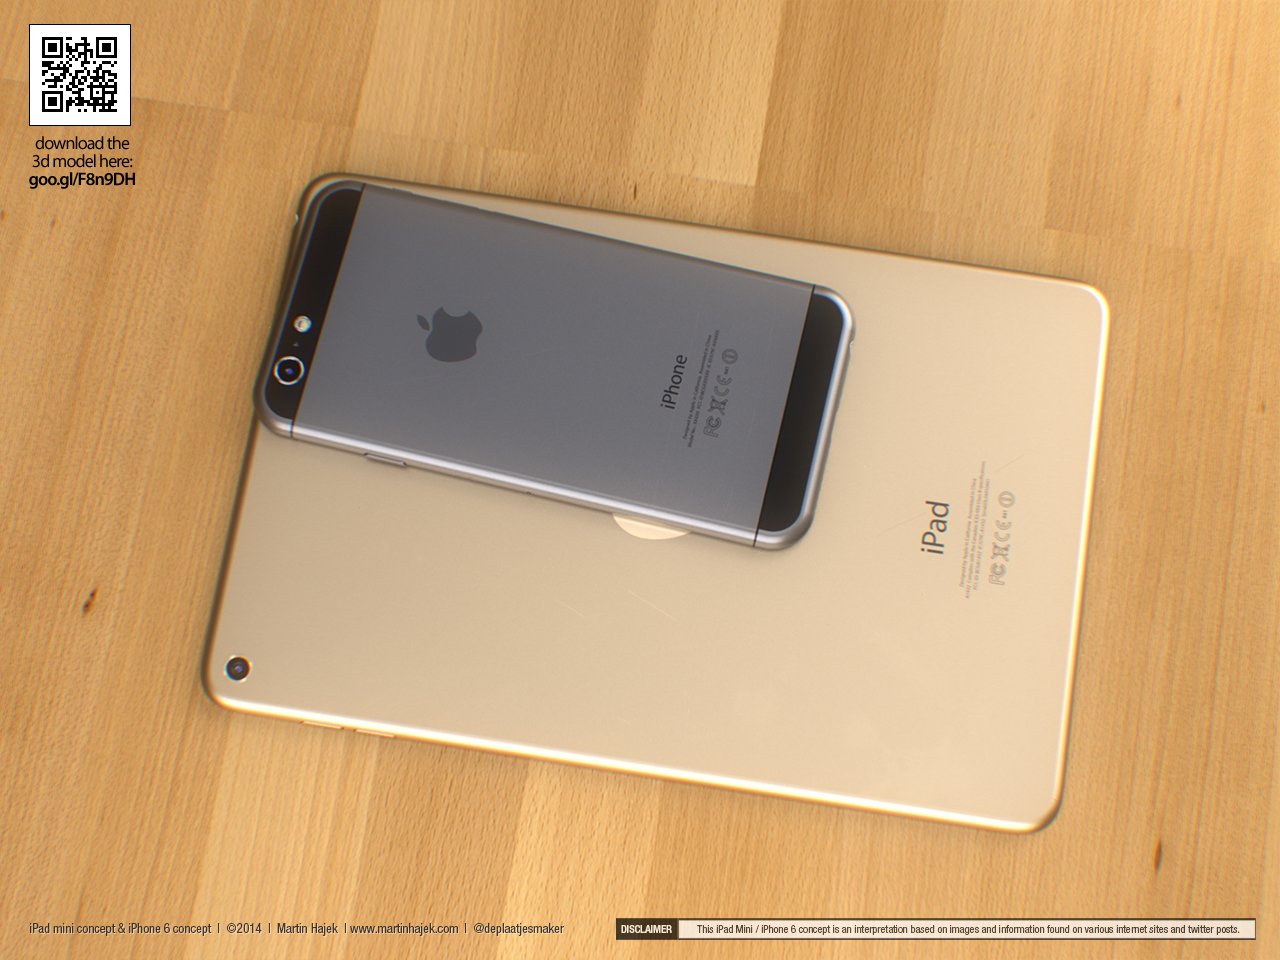 A new iPad Mini 3 concept shows what the tablet could look like if it borrows from the leaked iPhone 6 design.